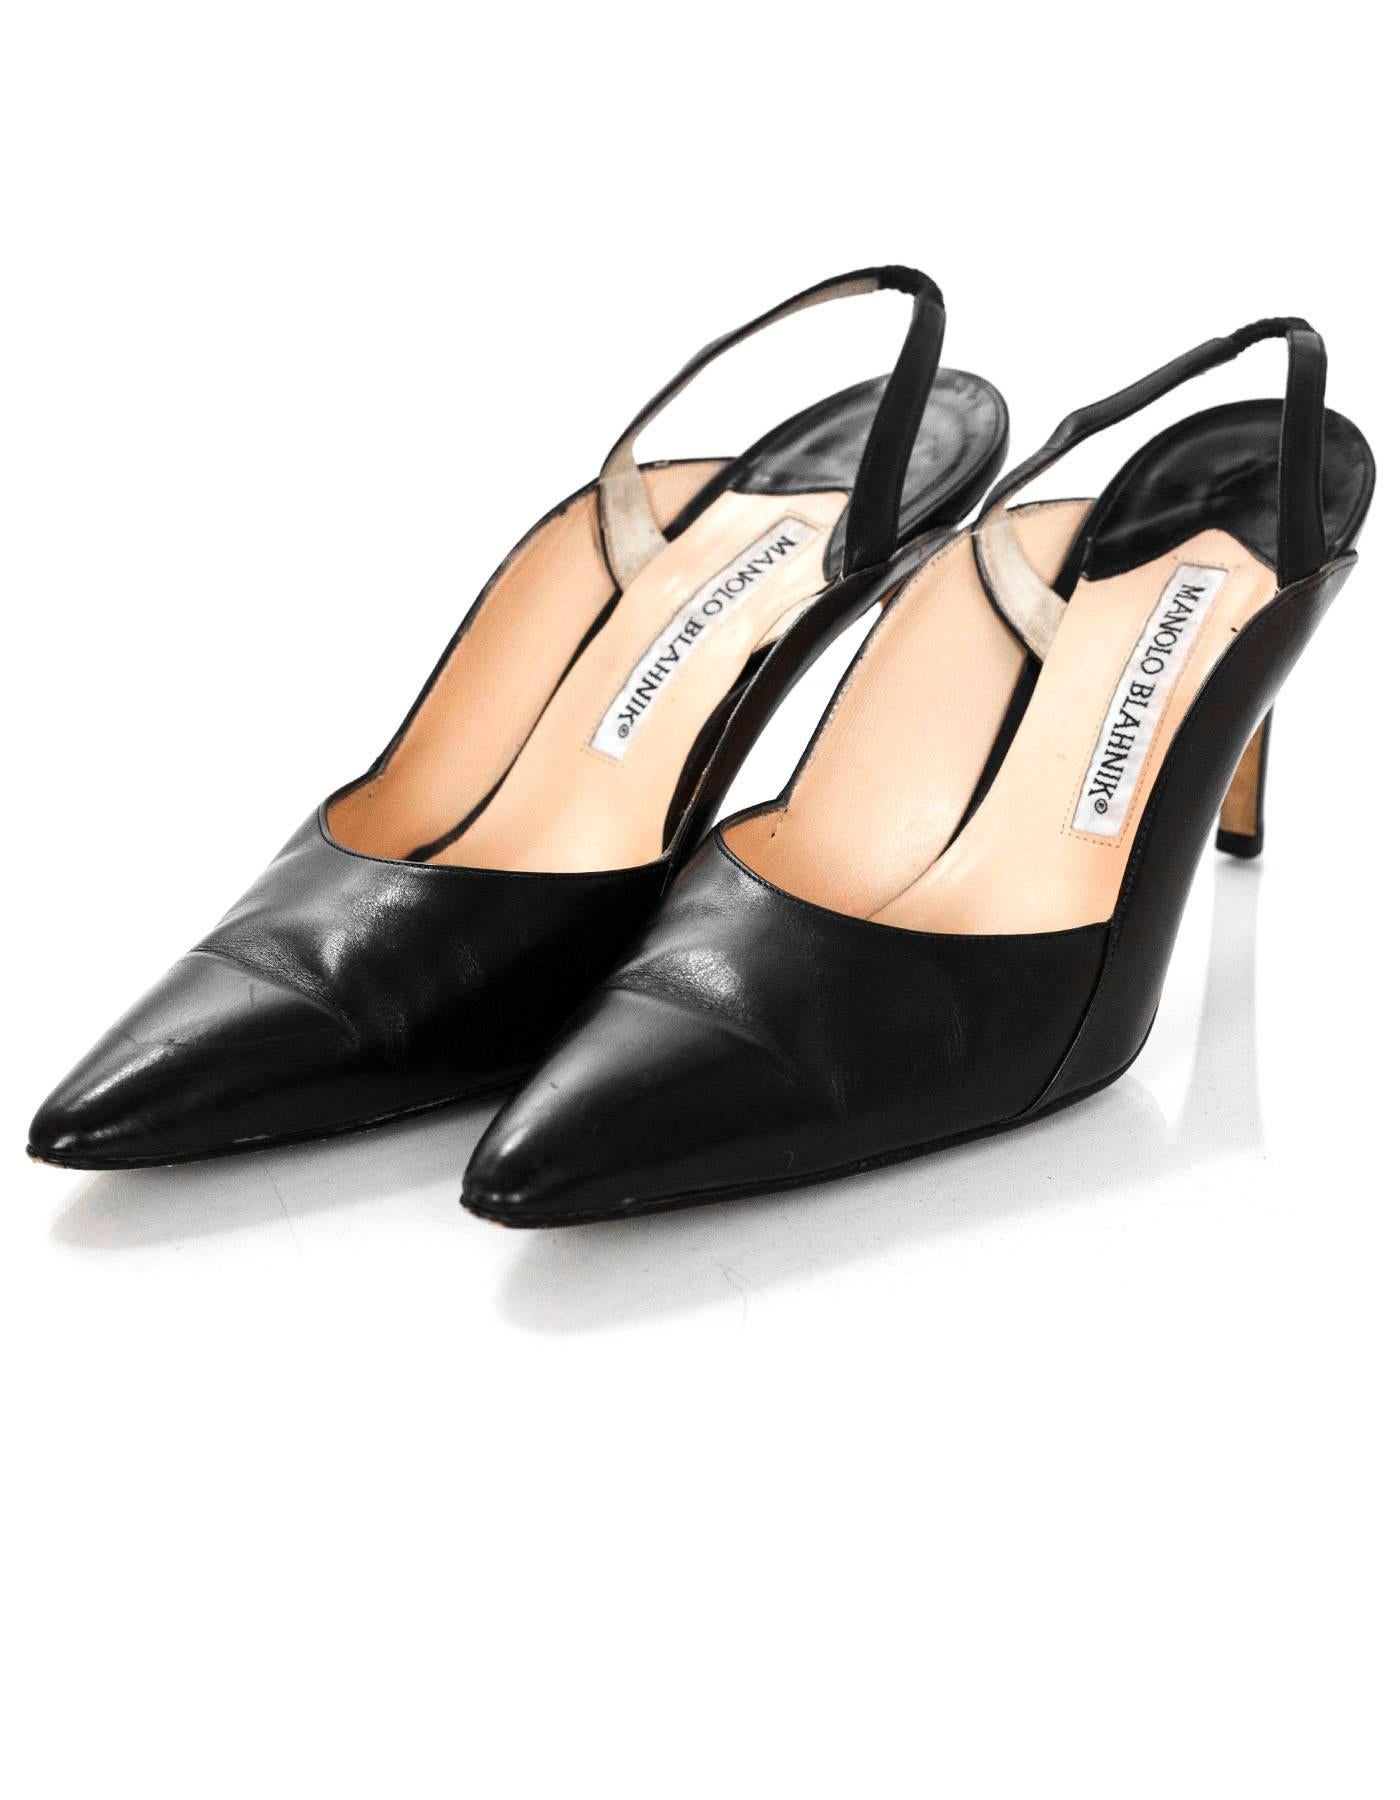 Manolo Blahnik Black & Brown Leather Slingback Pumps Sz 37.5

Made In: Italy
Color: Black, brown
Materials: Leather
Closure/Opening: Slide on
Sole Stamp: Manolo Blahnik Made in Italy 37.5
Overall Condition: Excellent pre-owned condition with the